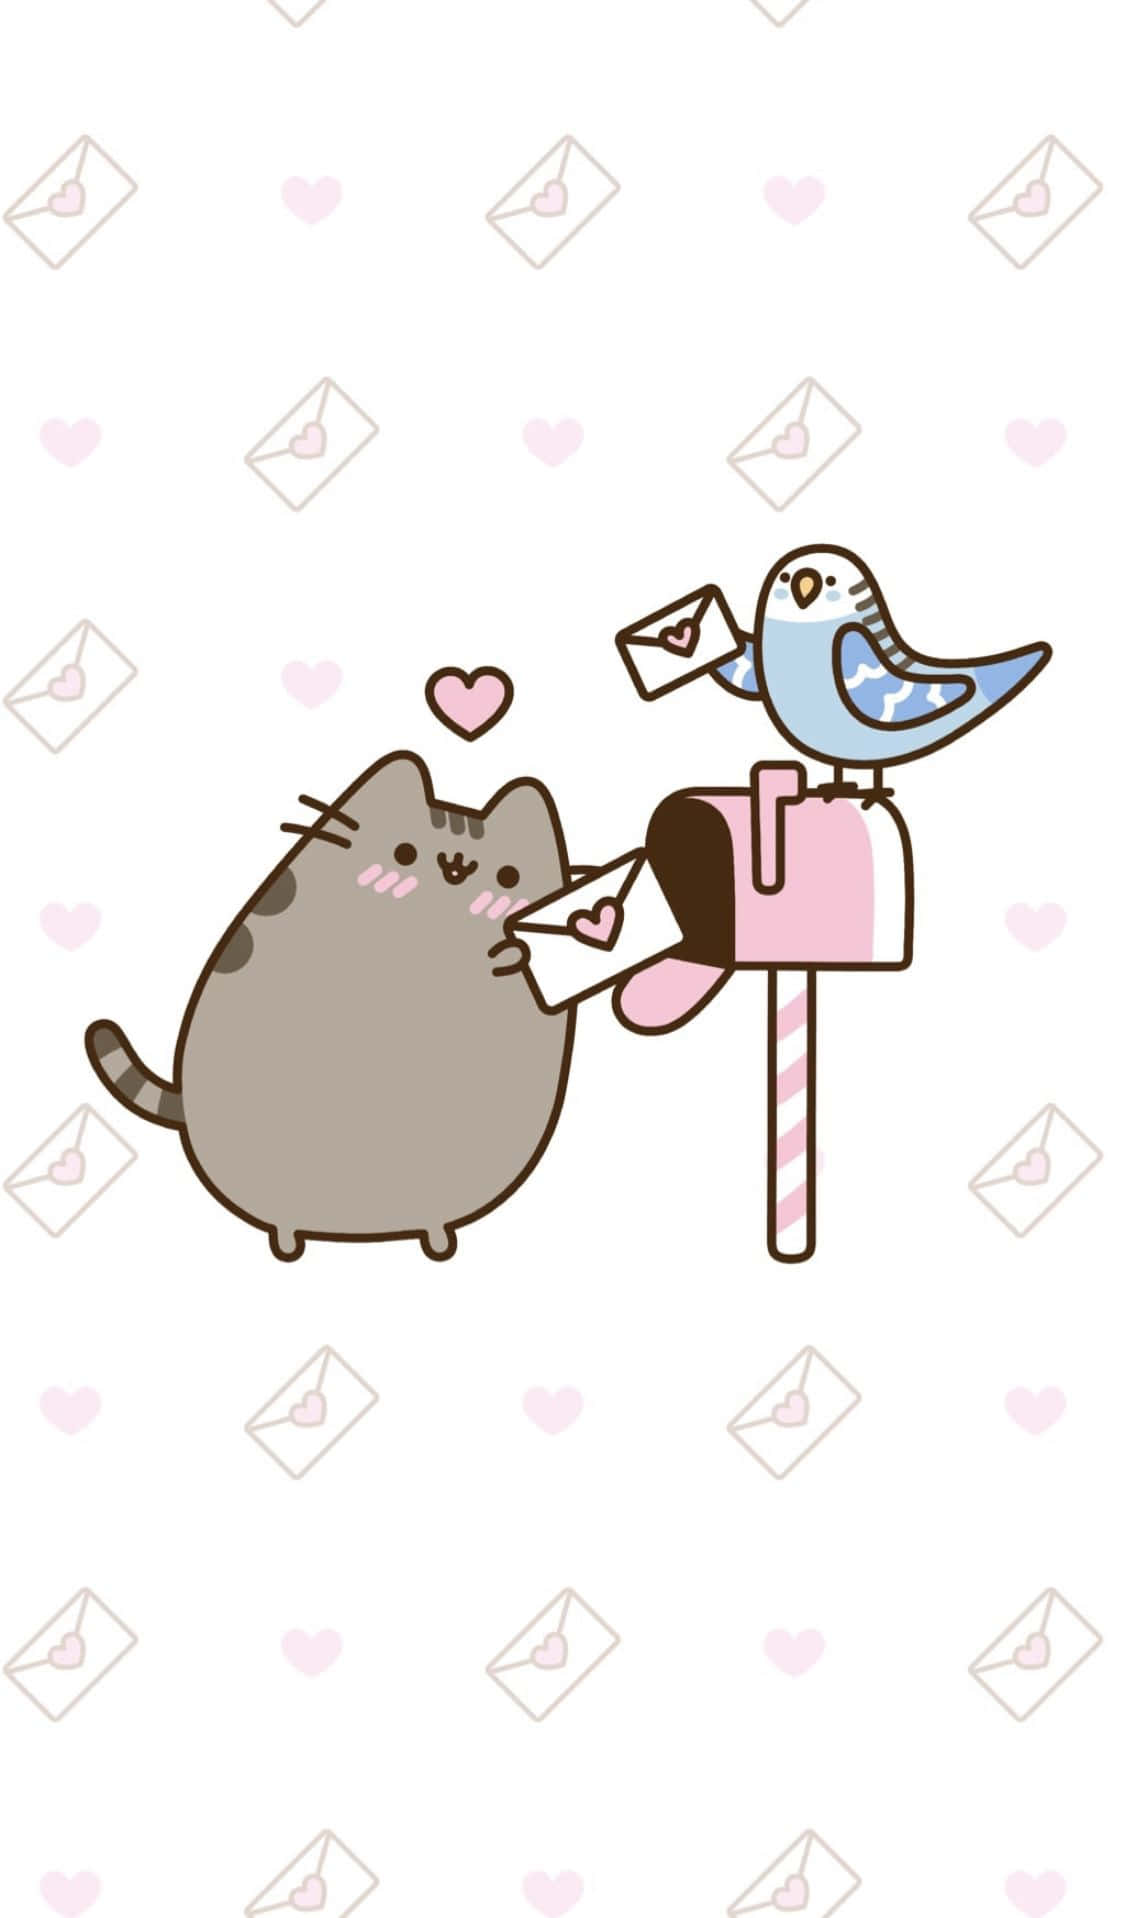 Let your day be filled with Kawaii love and Pusheen joy Wallpaper